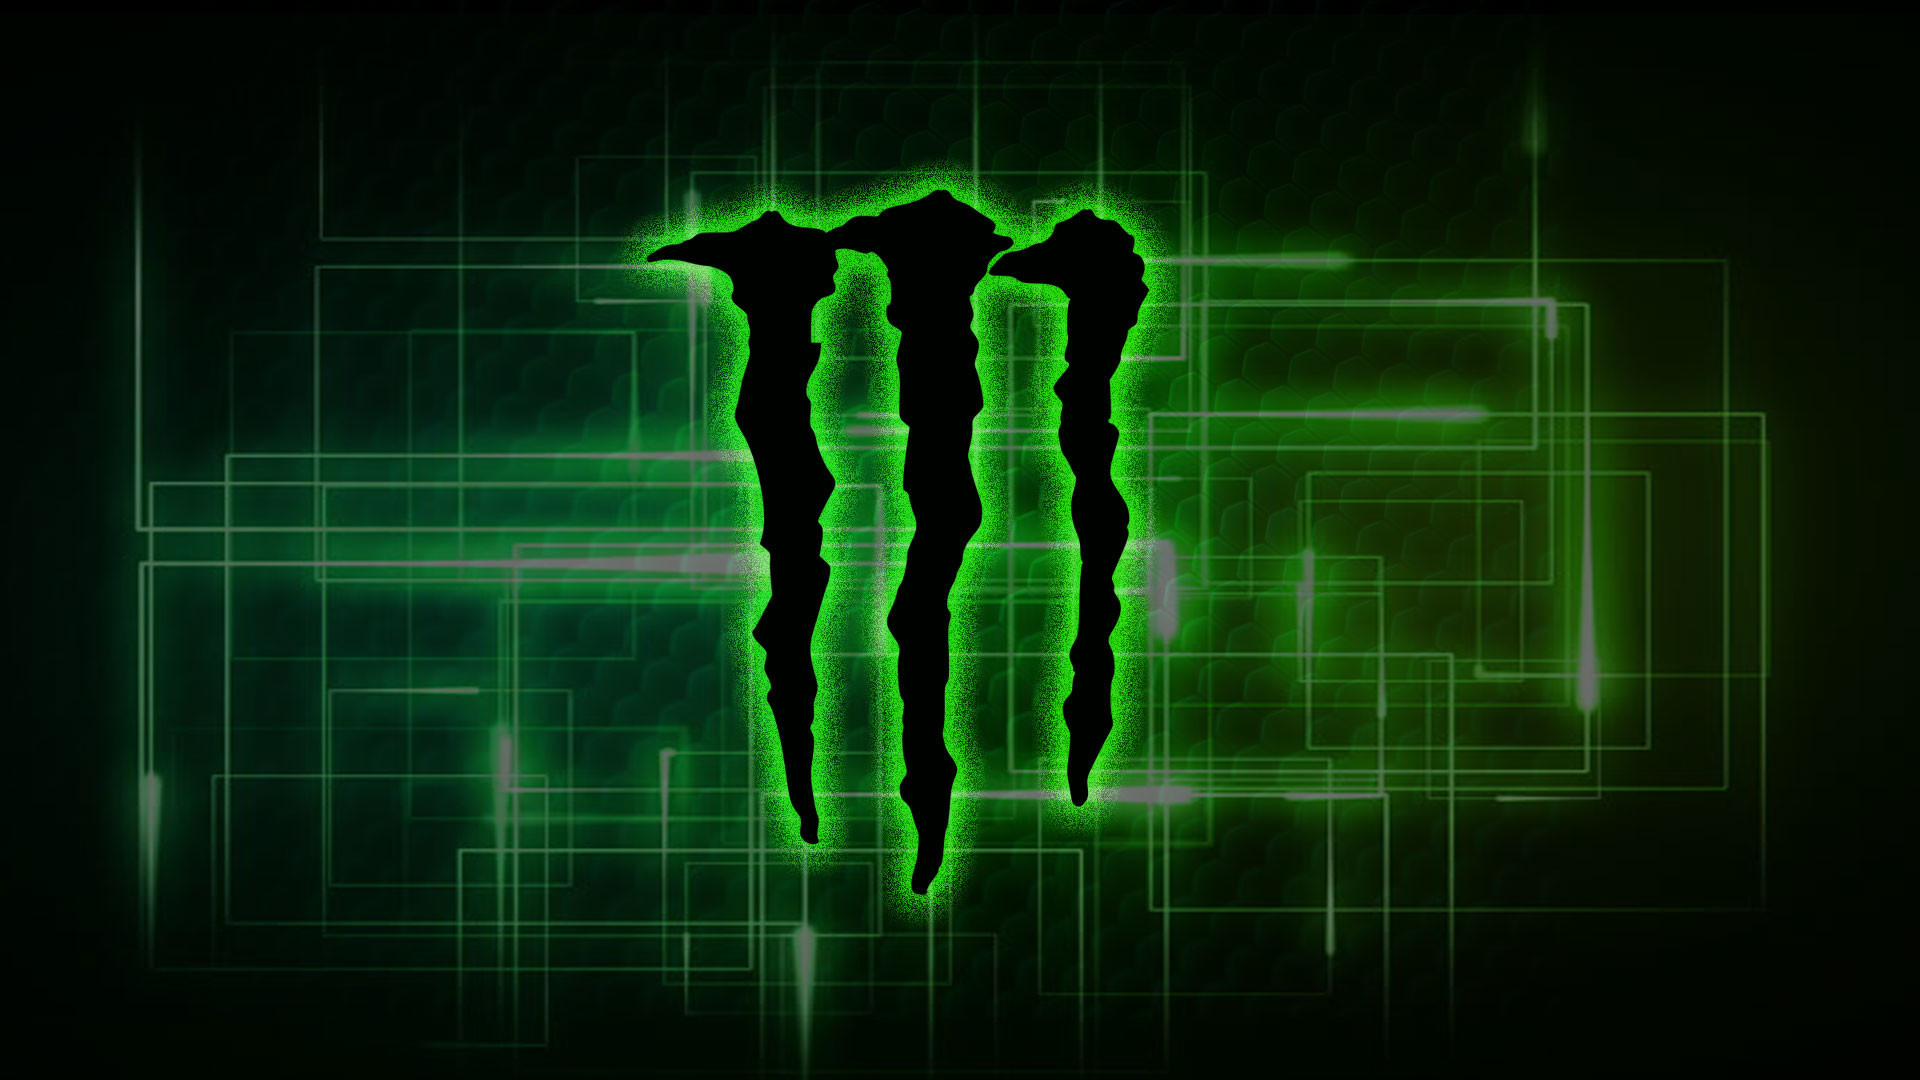 1920x1080  photos download monster energy wallpaper hd desktop wallpapers  high definition monitor download free amazing background photos artwork  1920Ã—1080 ...